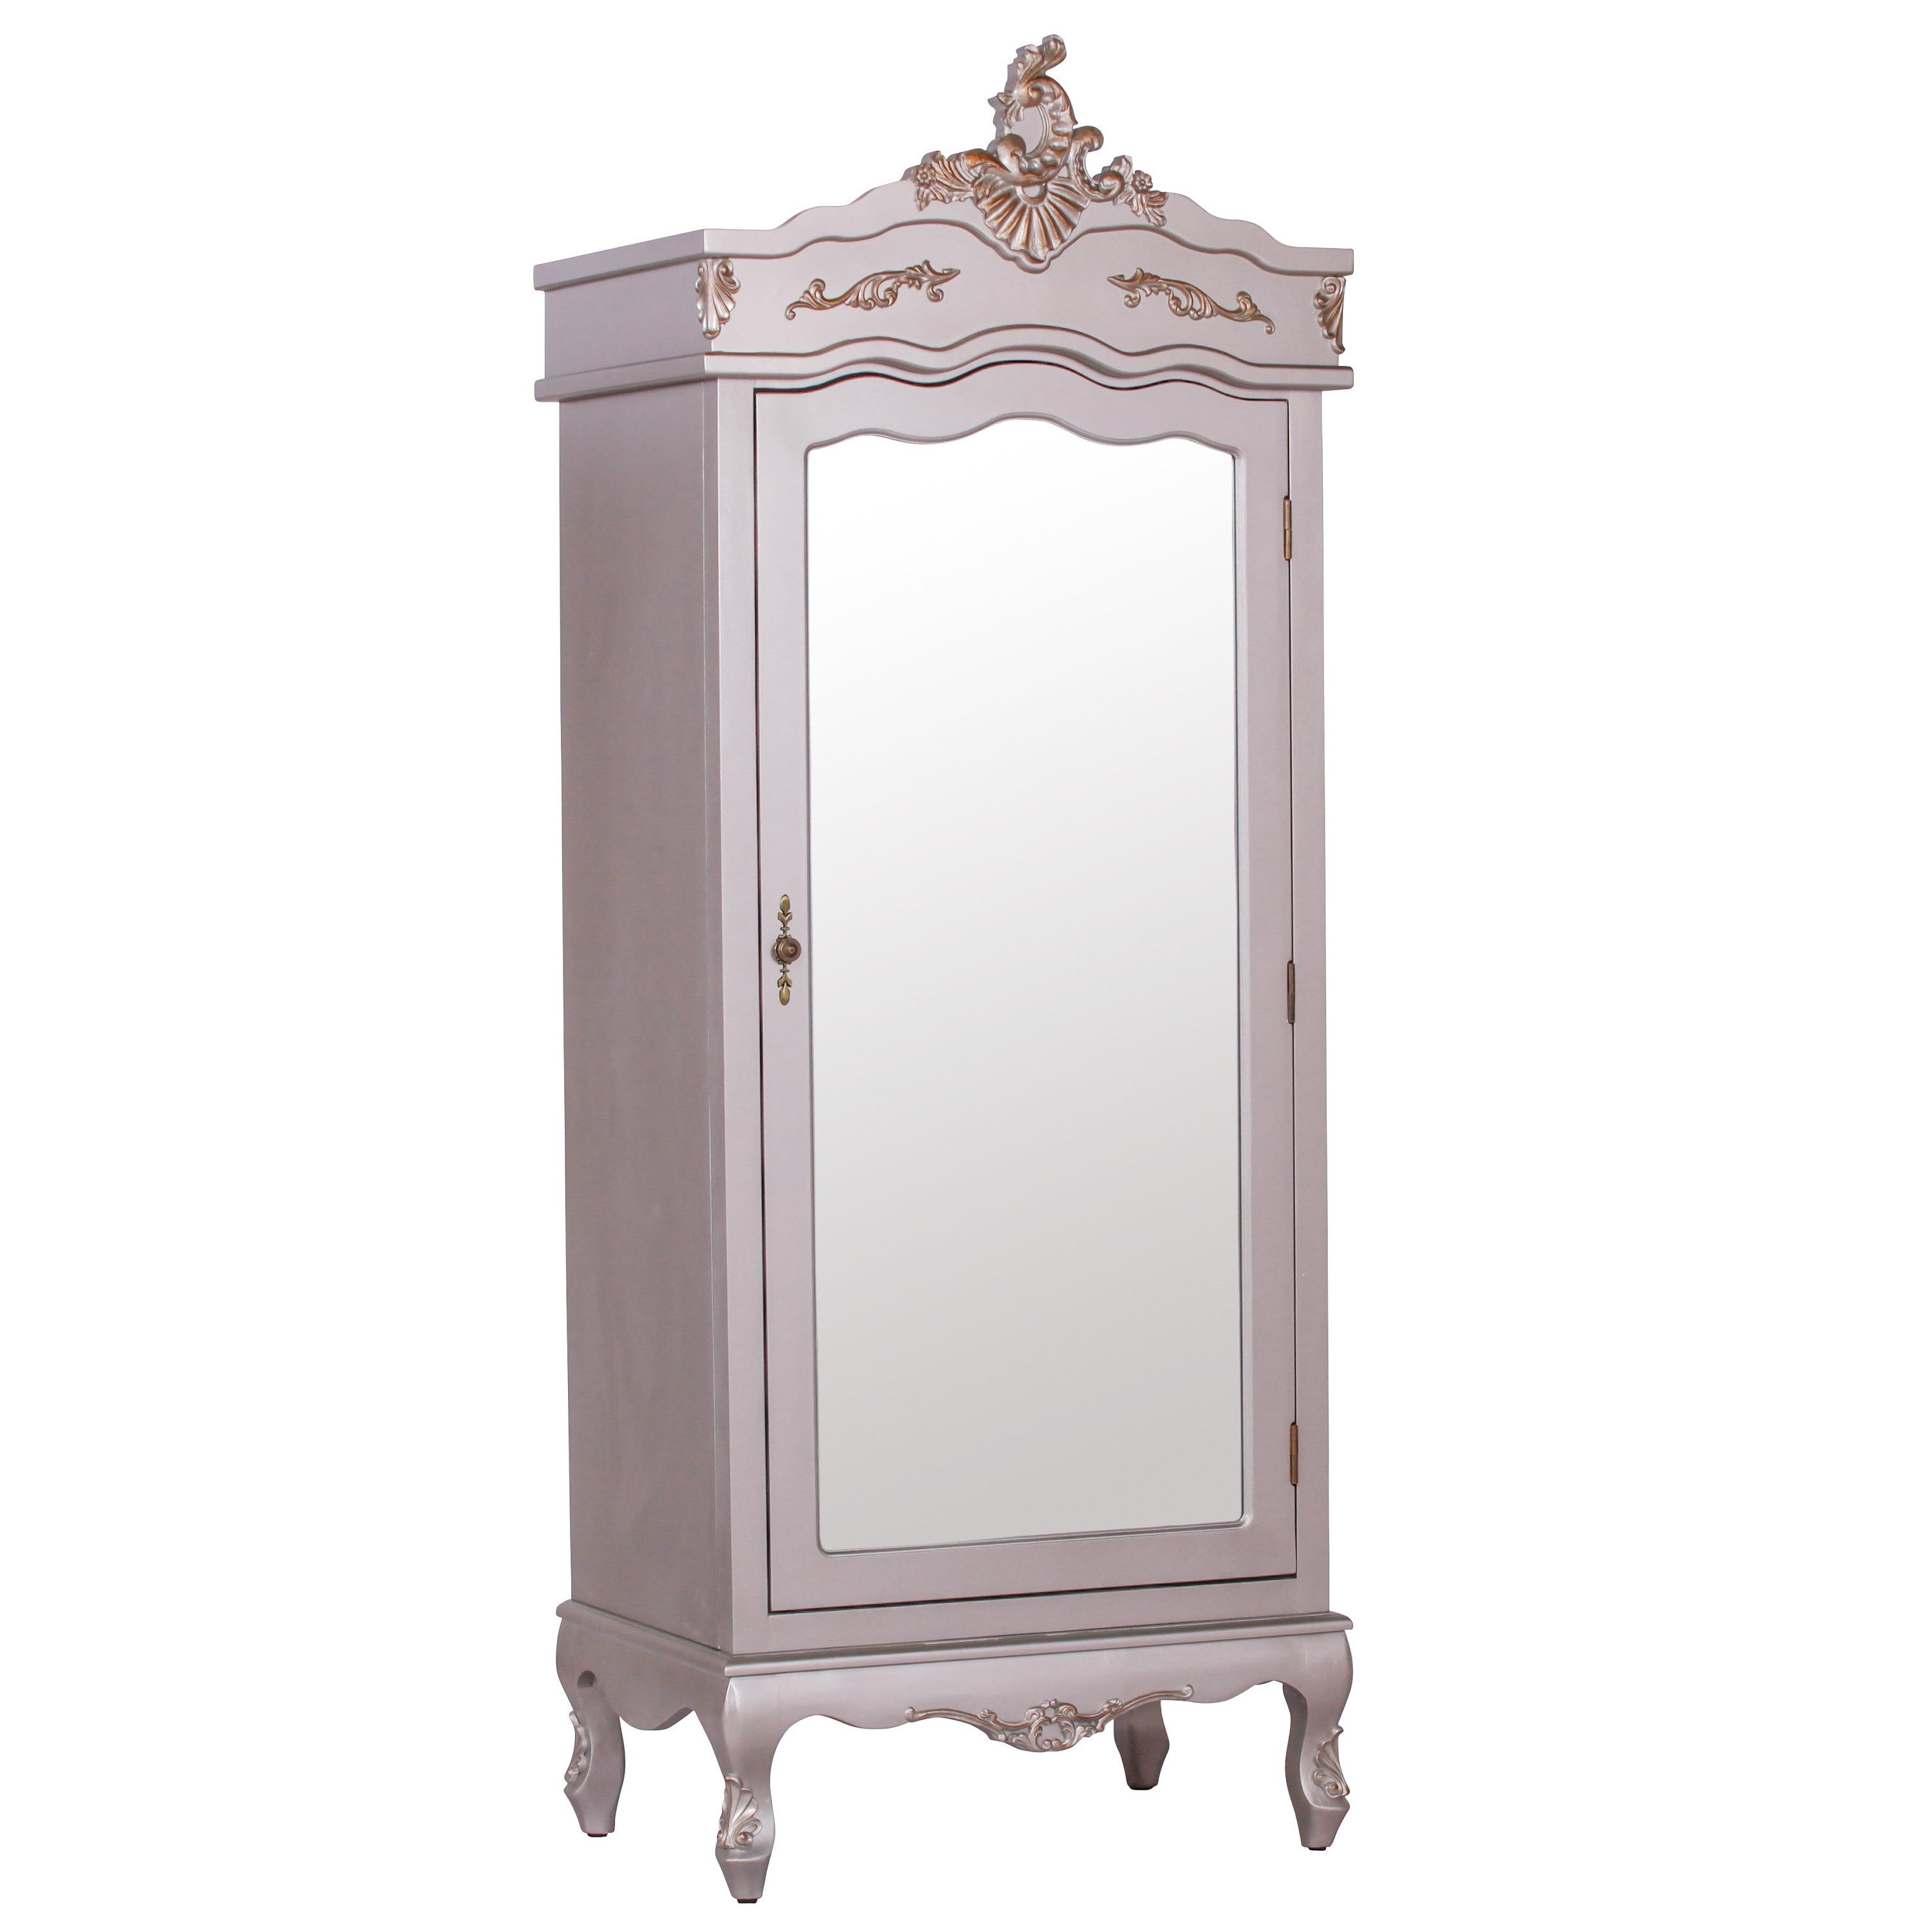 Antique French Style Full Mirror Single Door Armoire Wardrobe – Etsy Uk Throughout Single French Wardrobes (View 11 of 15)